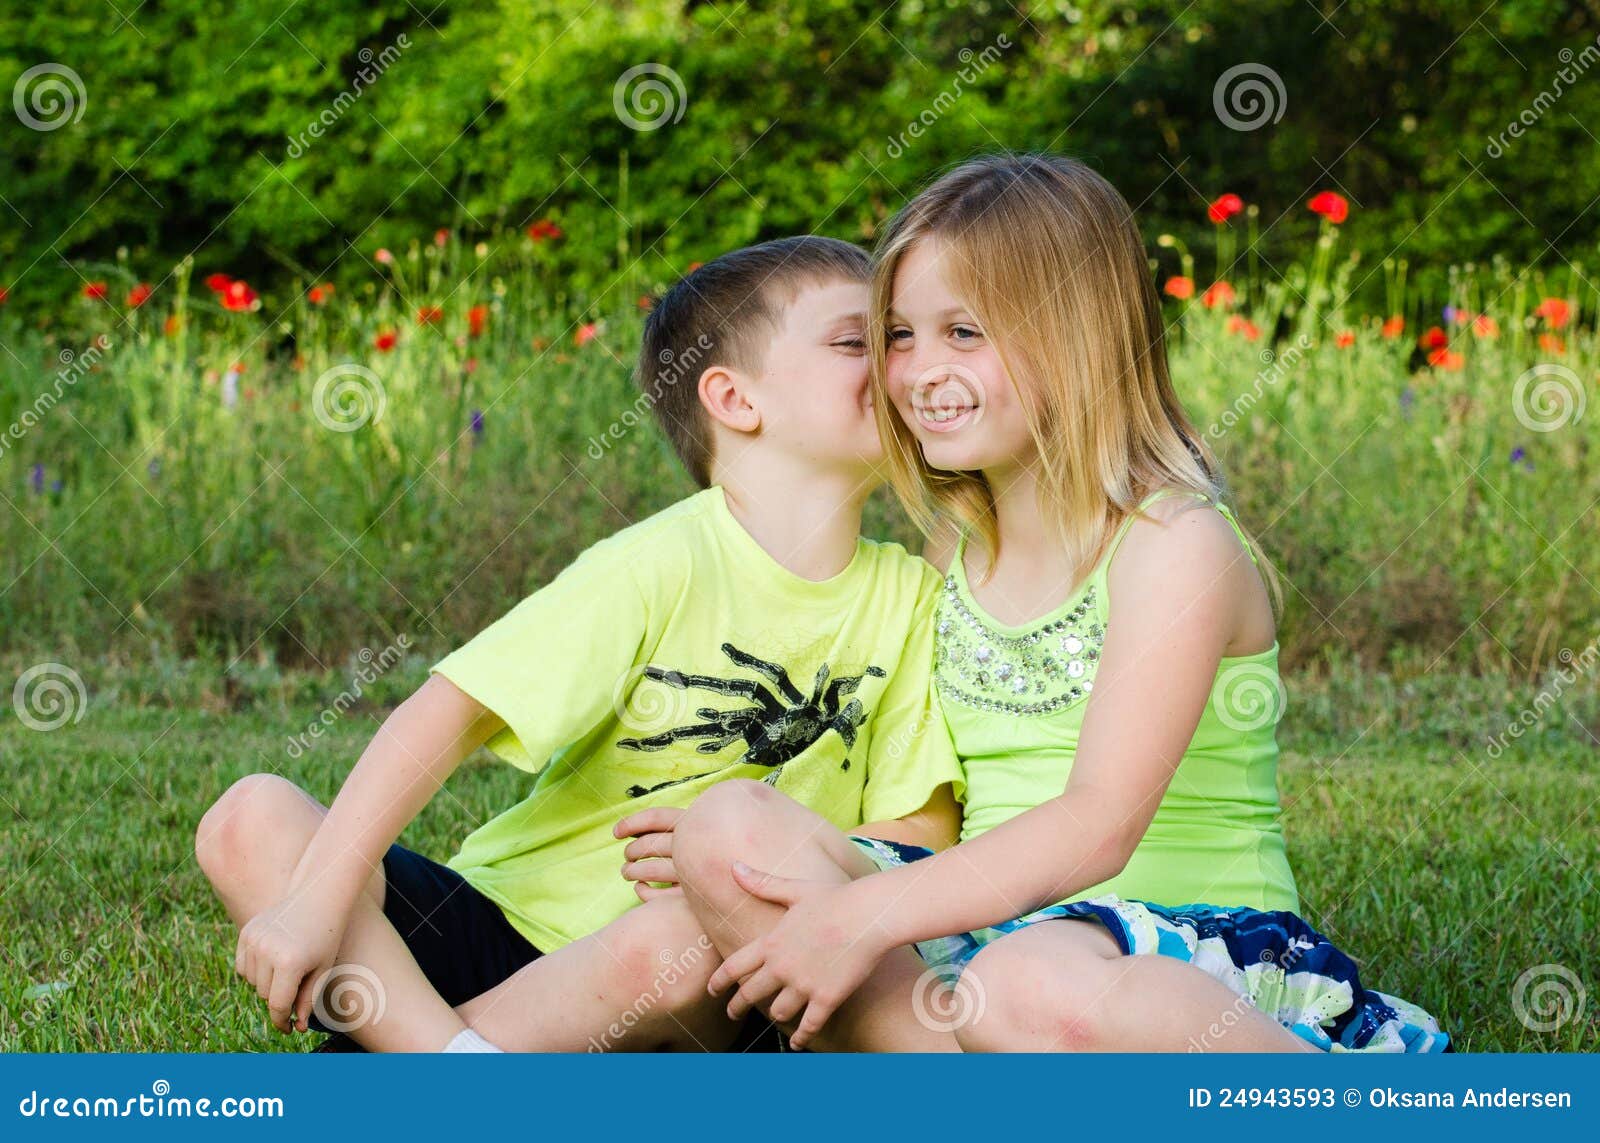 Siblings Sharing Secrets Stock Image Image Of Love Leaning 24943593